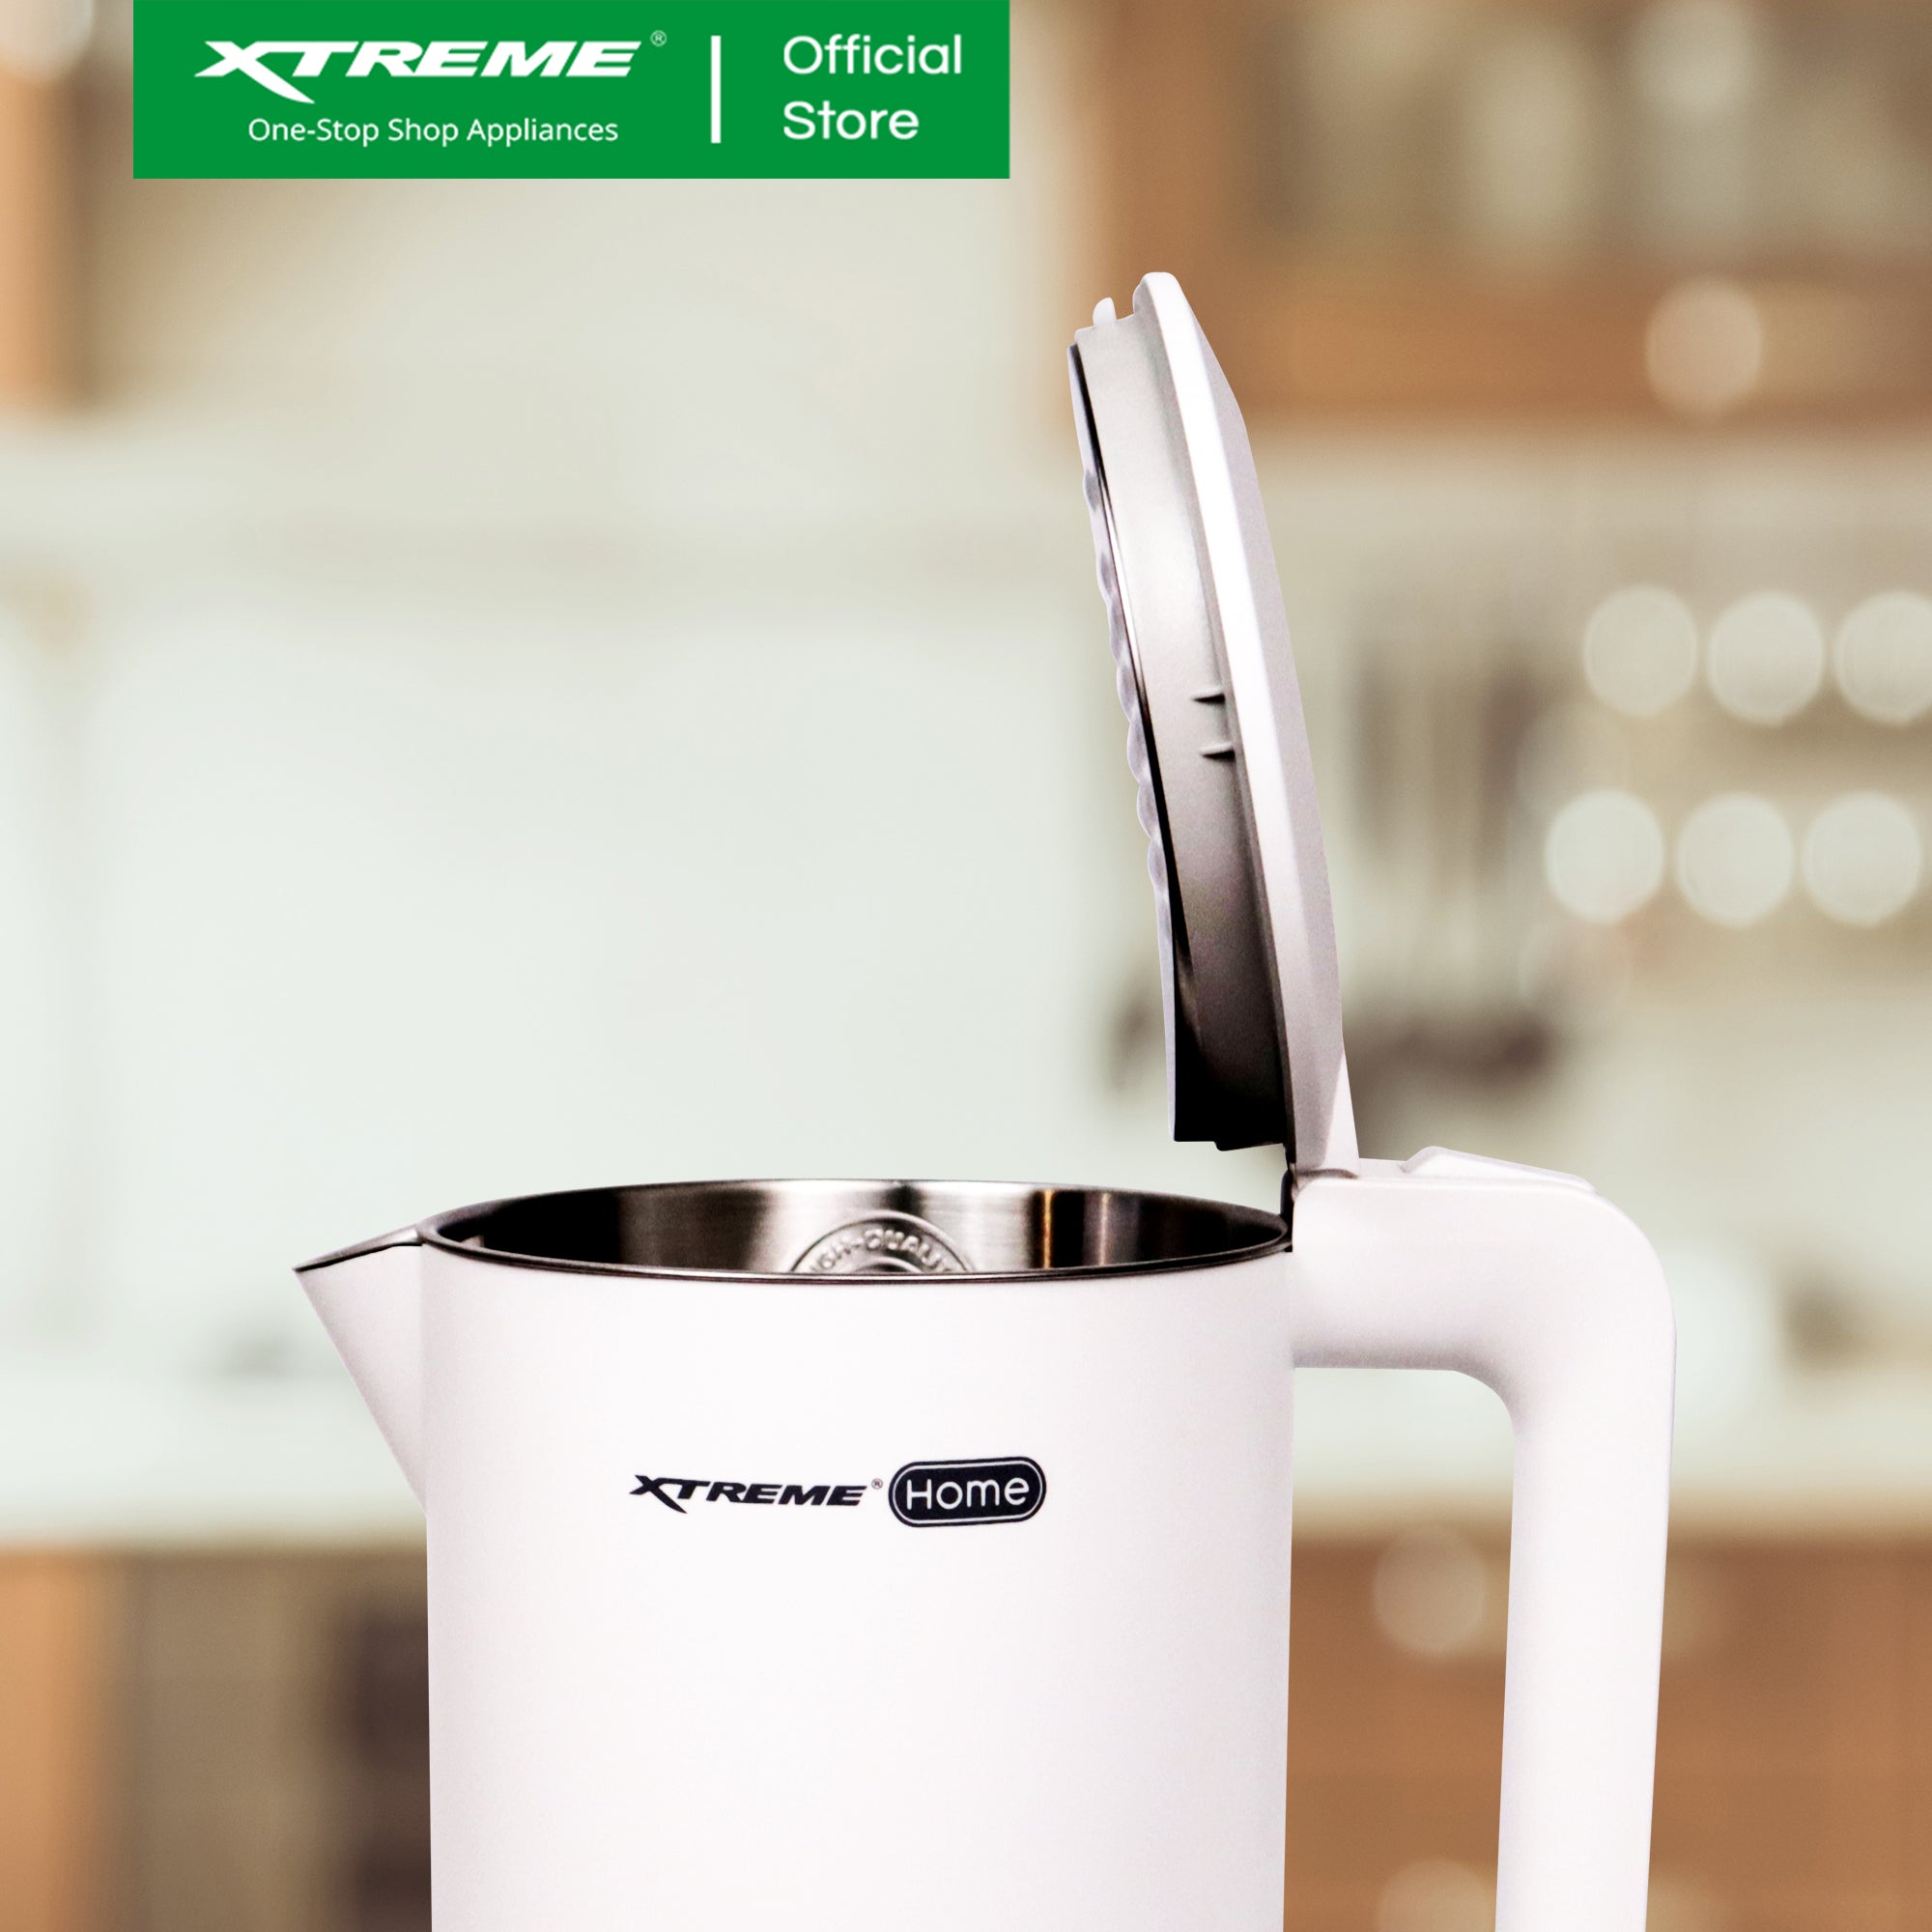 XTREME HOME 1.7L Electric Kettle Seamless Inner Pot w/ Water Indicator (White) | XH-KT-DWCLH17WHITE